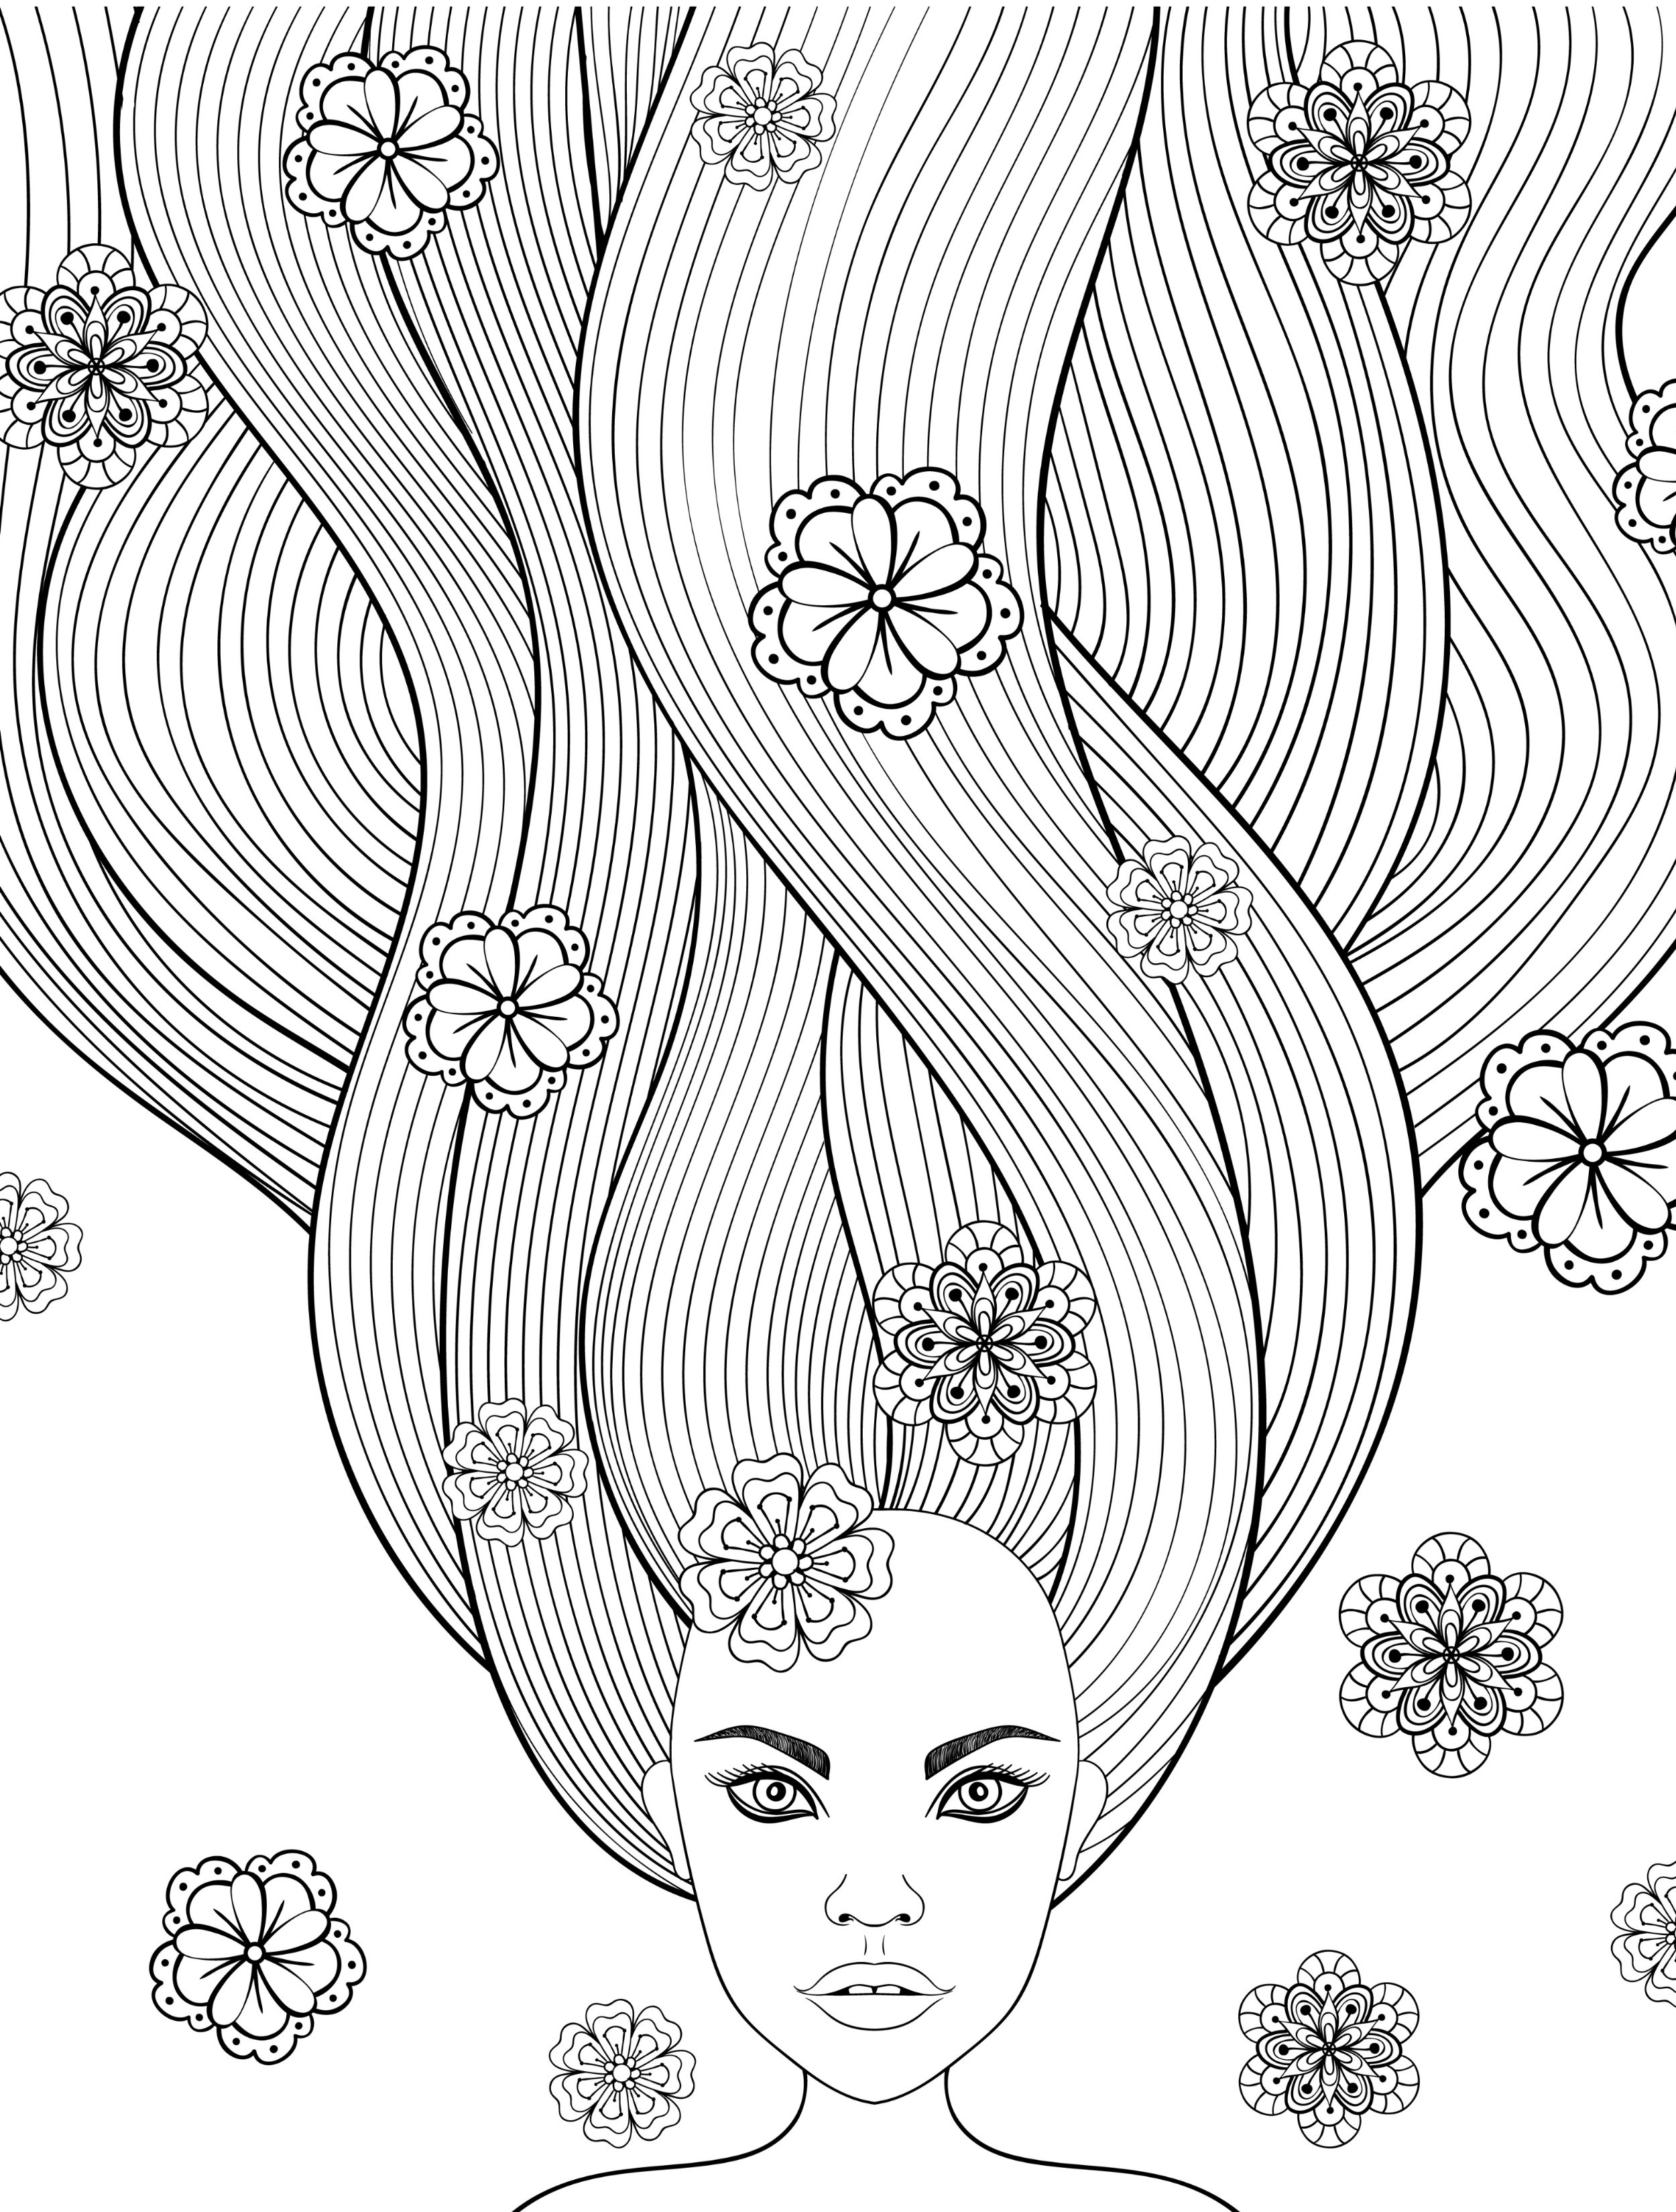 Coloring Pages Of Girls For Adults
 10 Crazy Hair Adult Coloring Pages Page 8 of 12 Nerdy